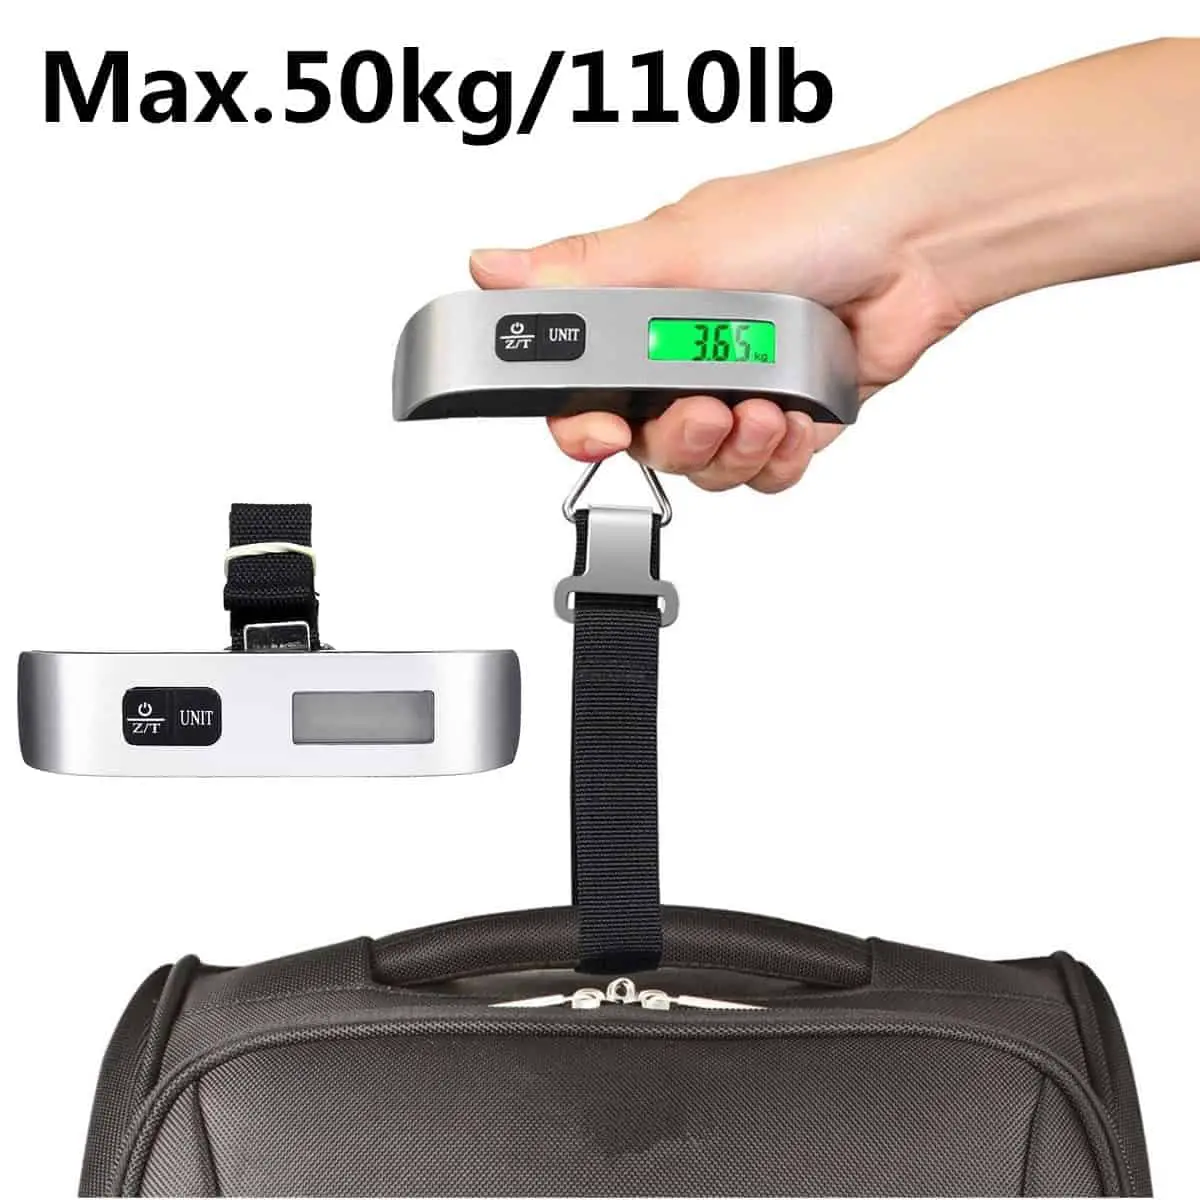 Are Portable Luggage Scales Accurate? - Travel Bag Experts